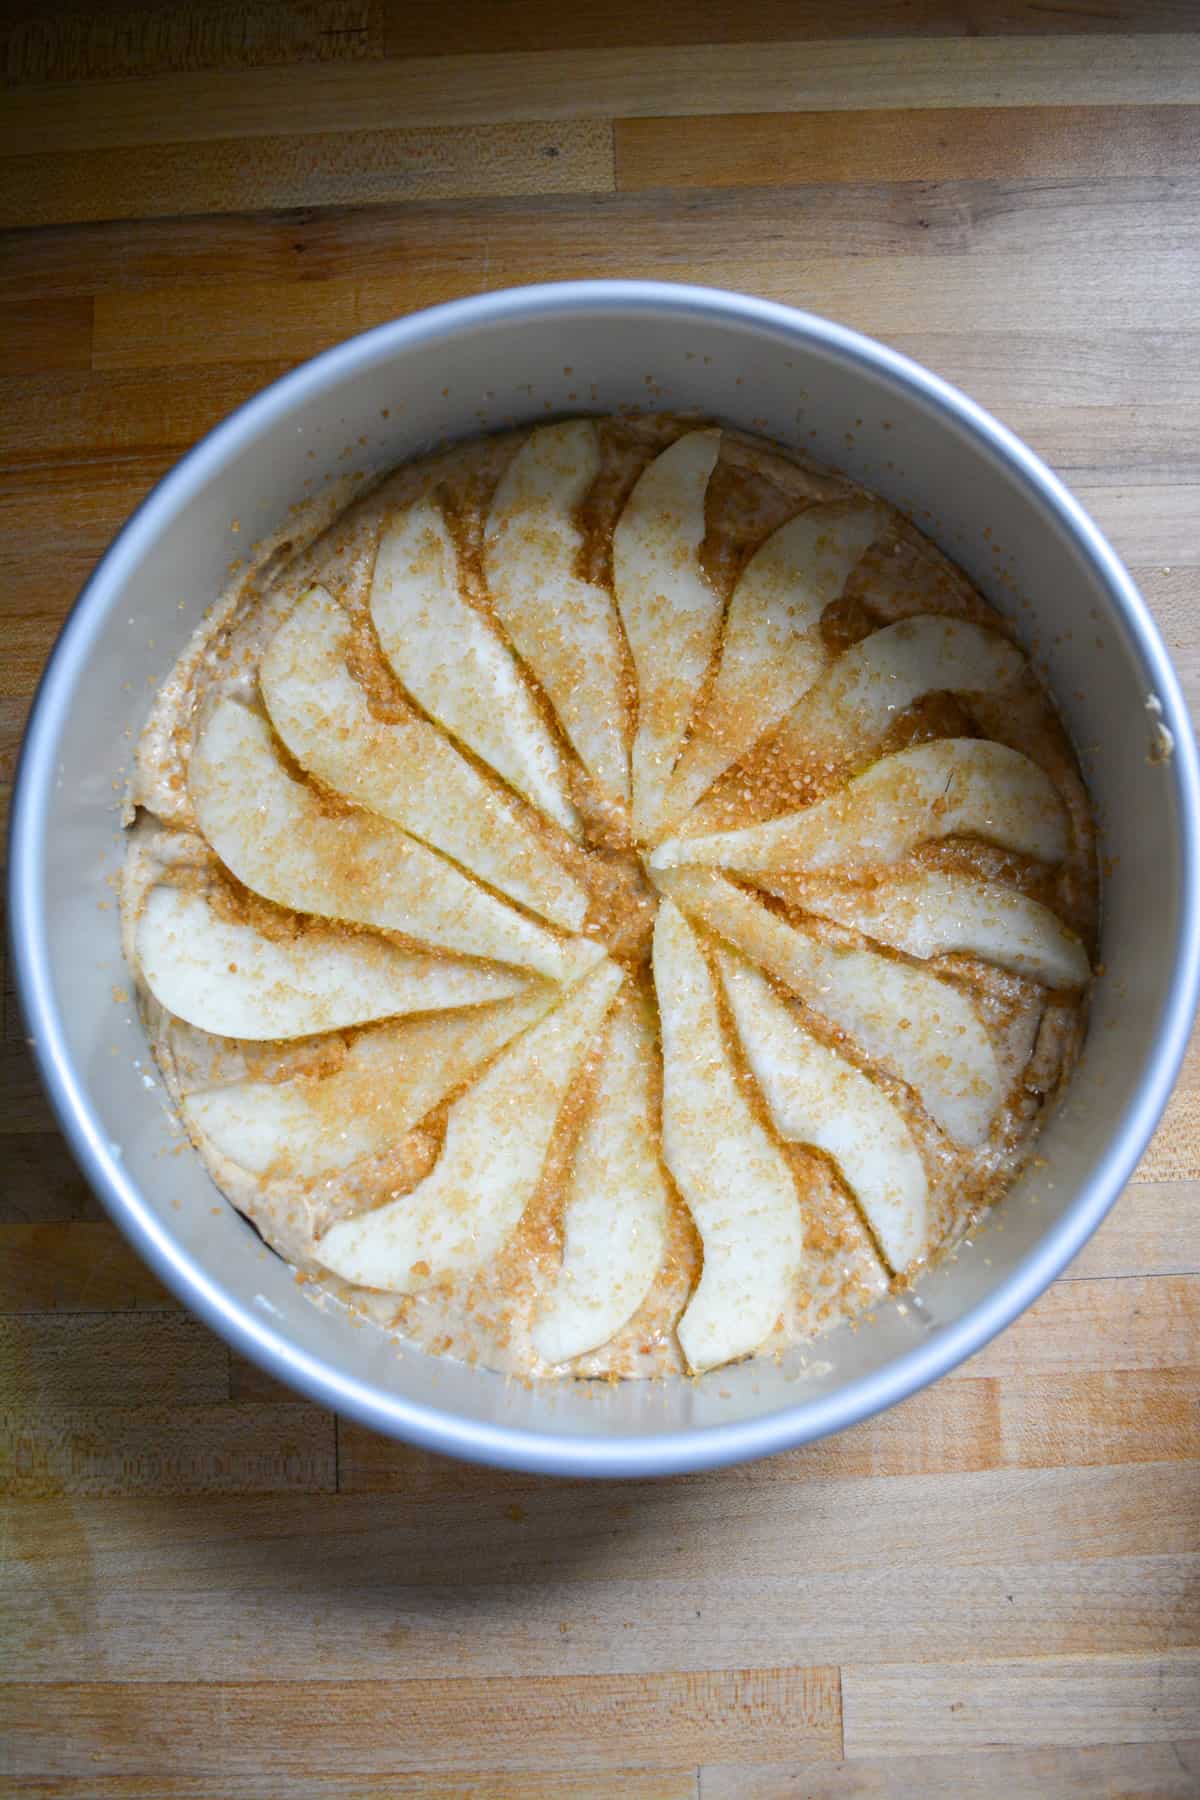 Photo of cake batter with pears in a circle on top ready to be baked.